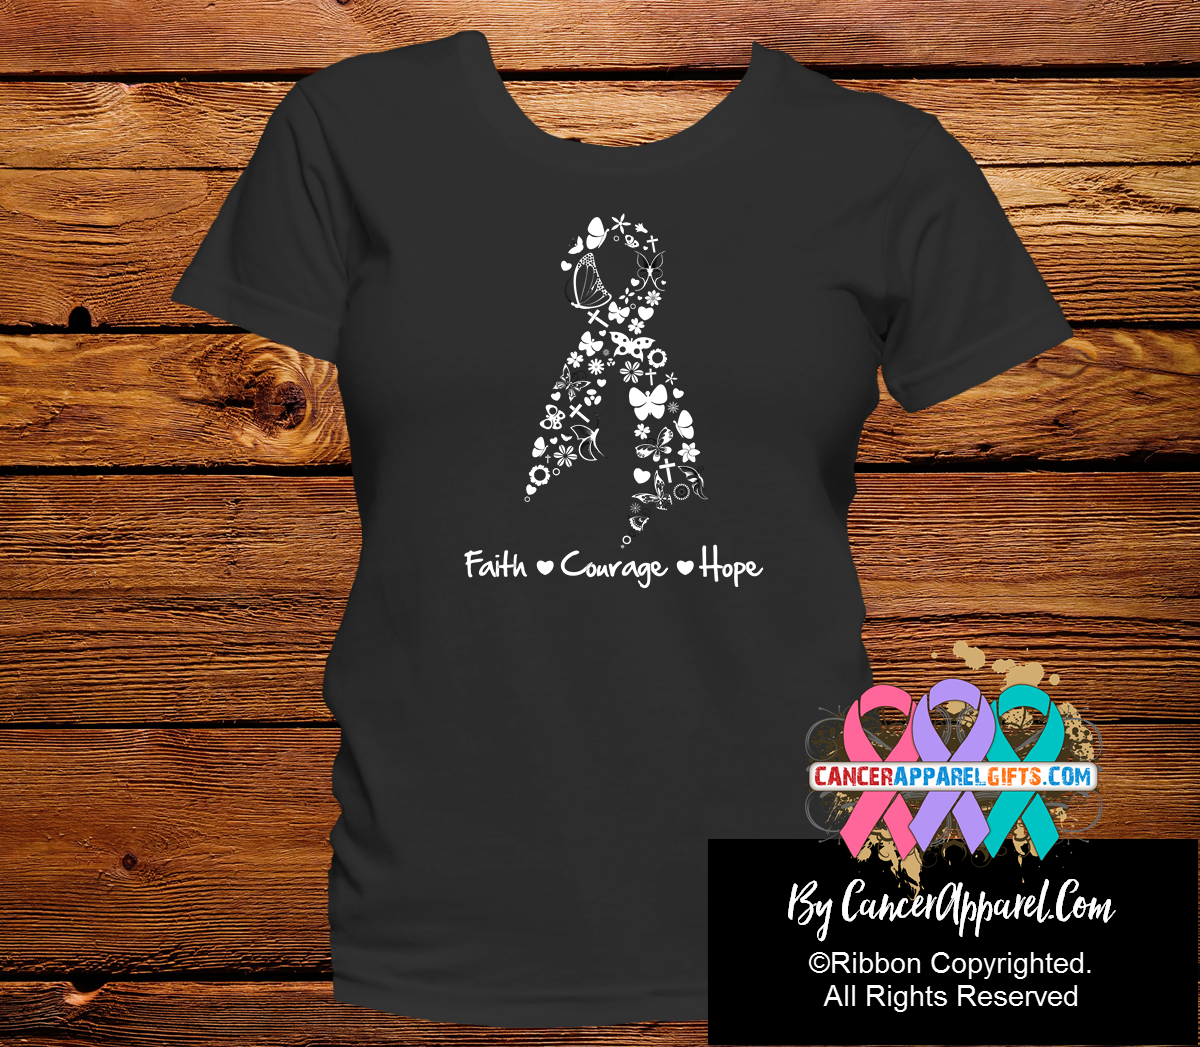 Lung Cancer Faith Courage Hope Shirts - Cancer Apparel and Gifts